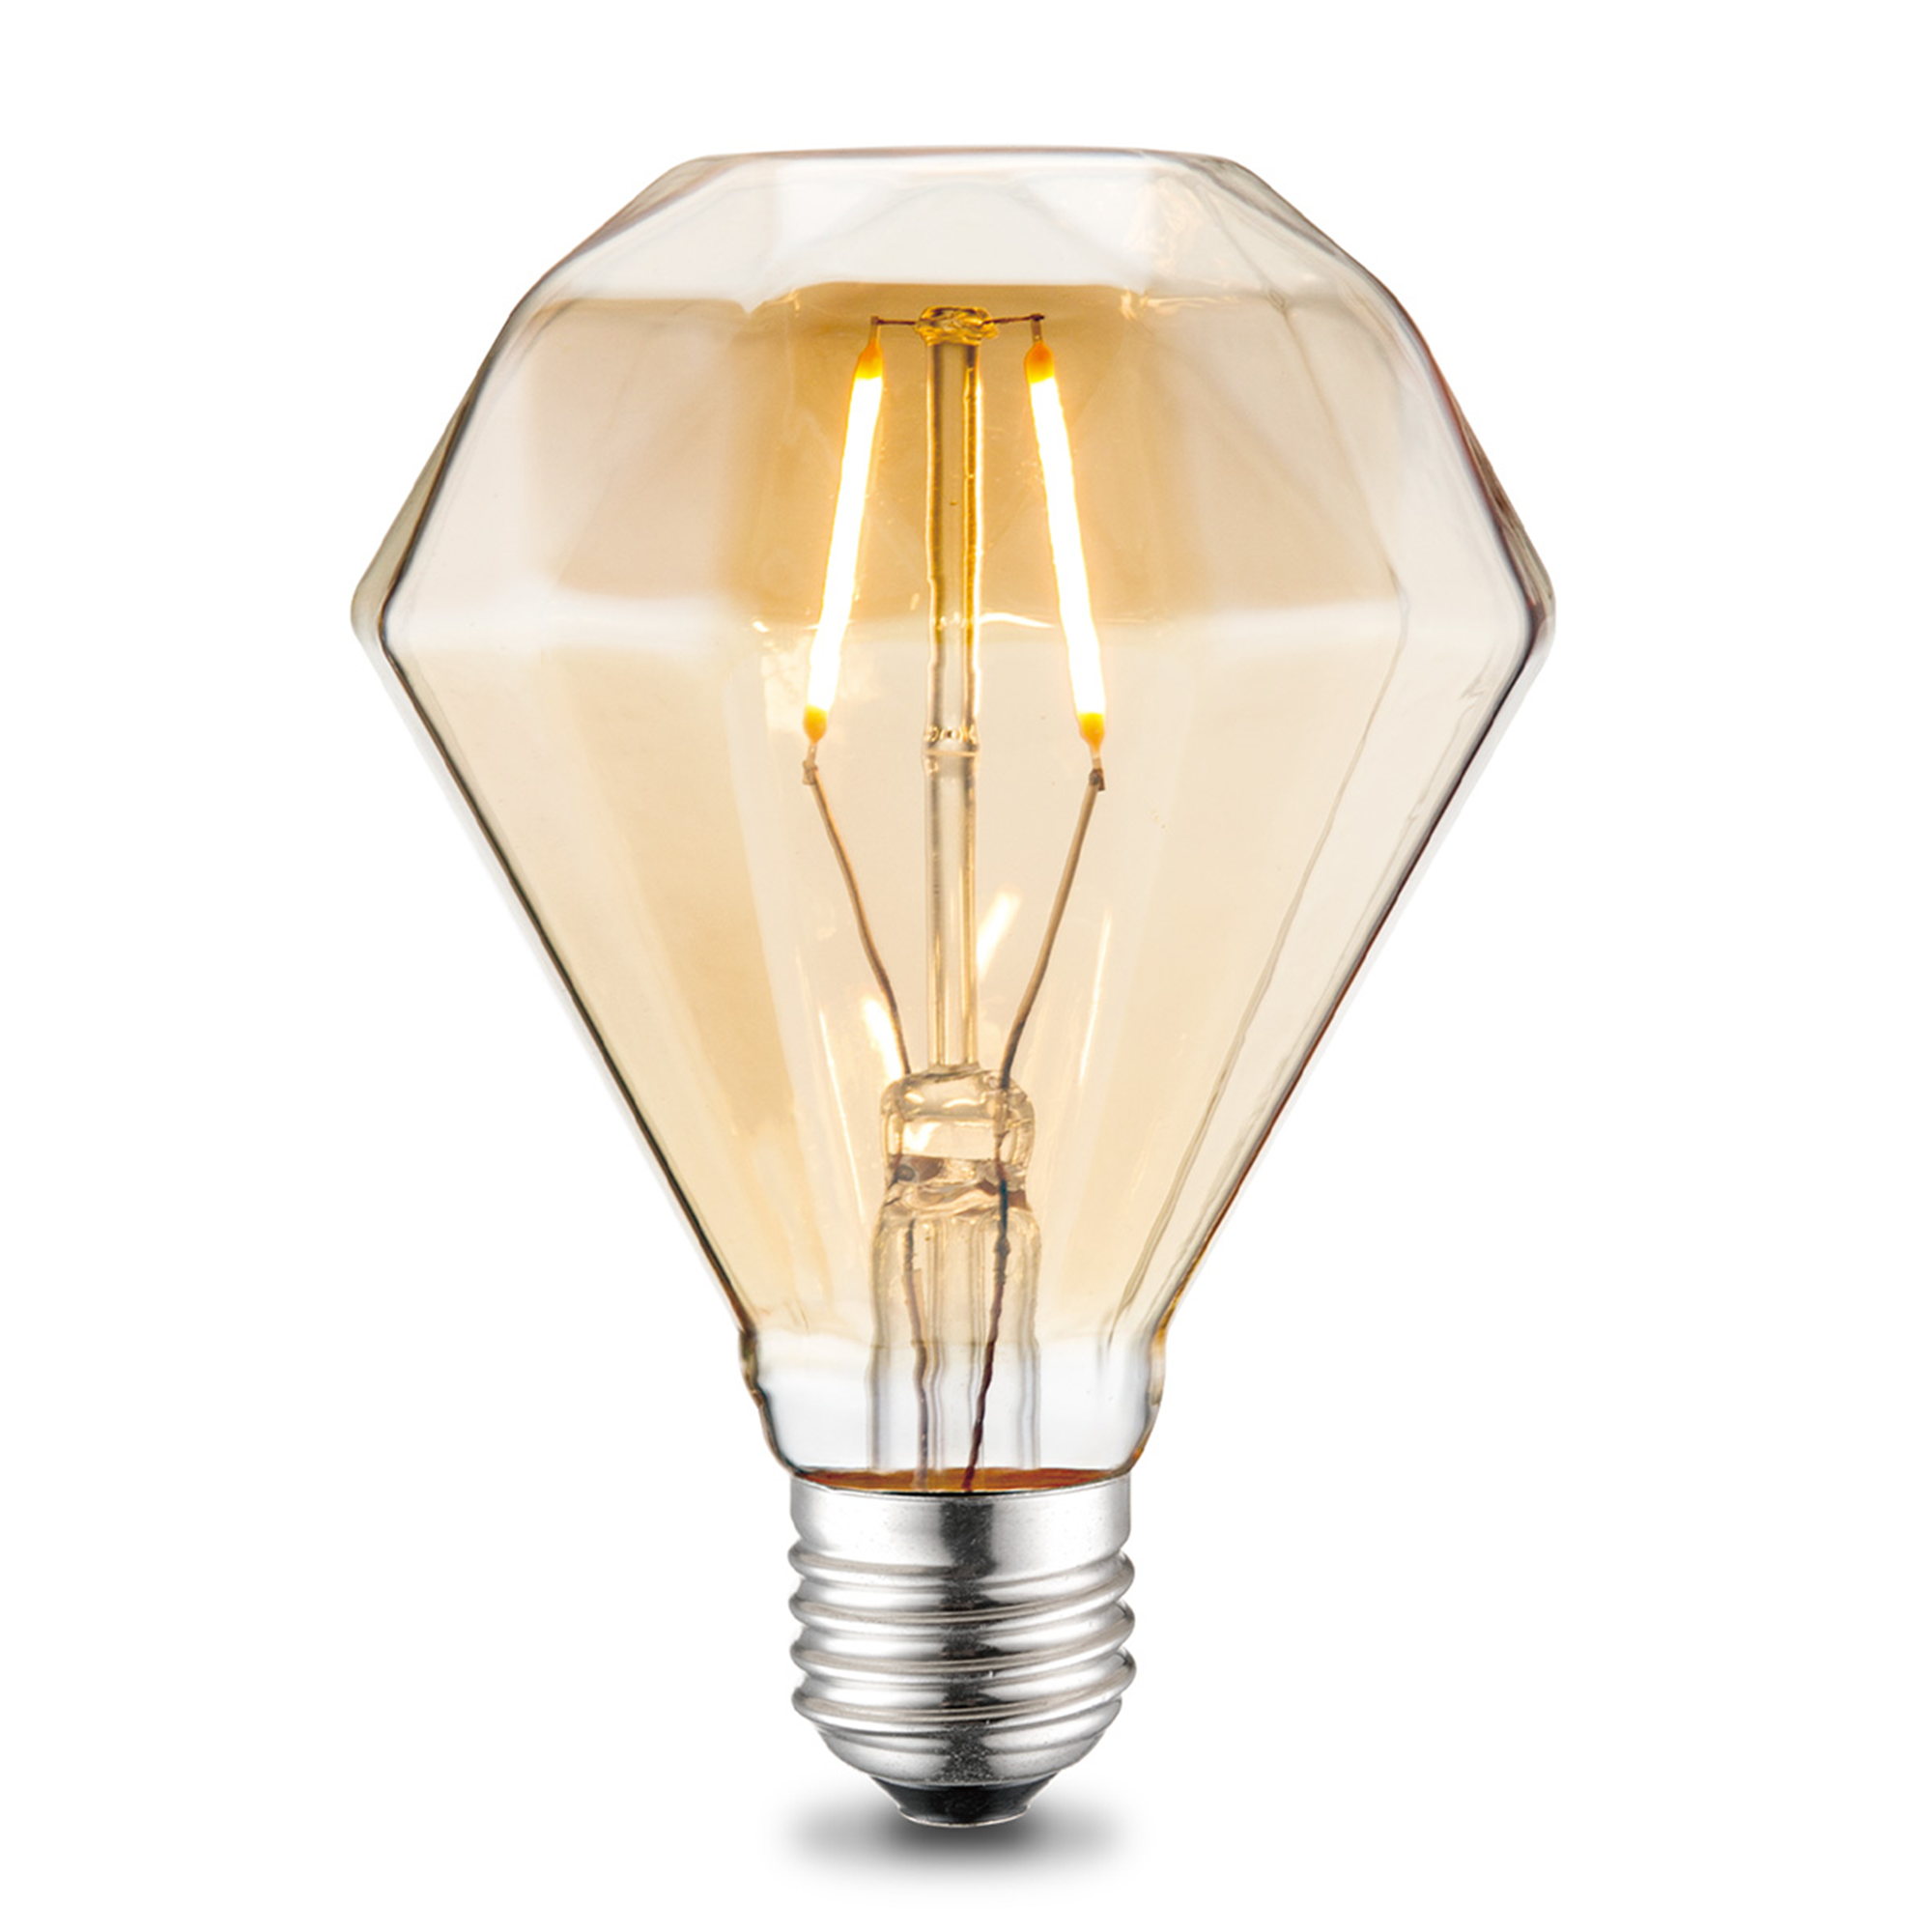 LED-Leuchtmittel 'Diamond' amber E27 2W 160 lm dimmbar + product picture